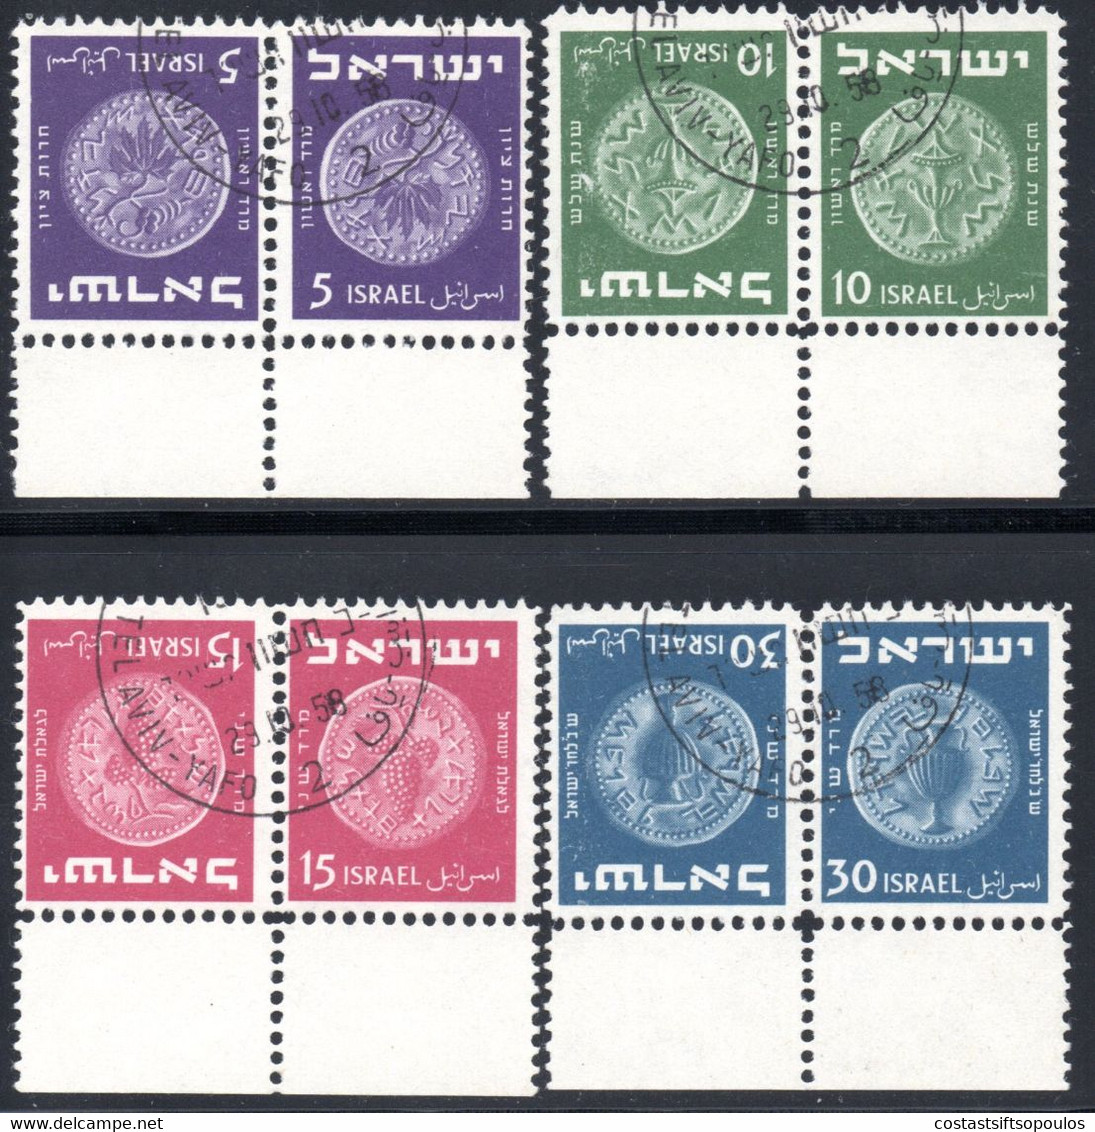 1080 ISRAEL 1949 COINS #21-26 GUTTER TETE BECHE AND TETE BECHE PAIRS,FINE USED - Oblitérés (sans Tabs)